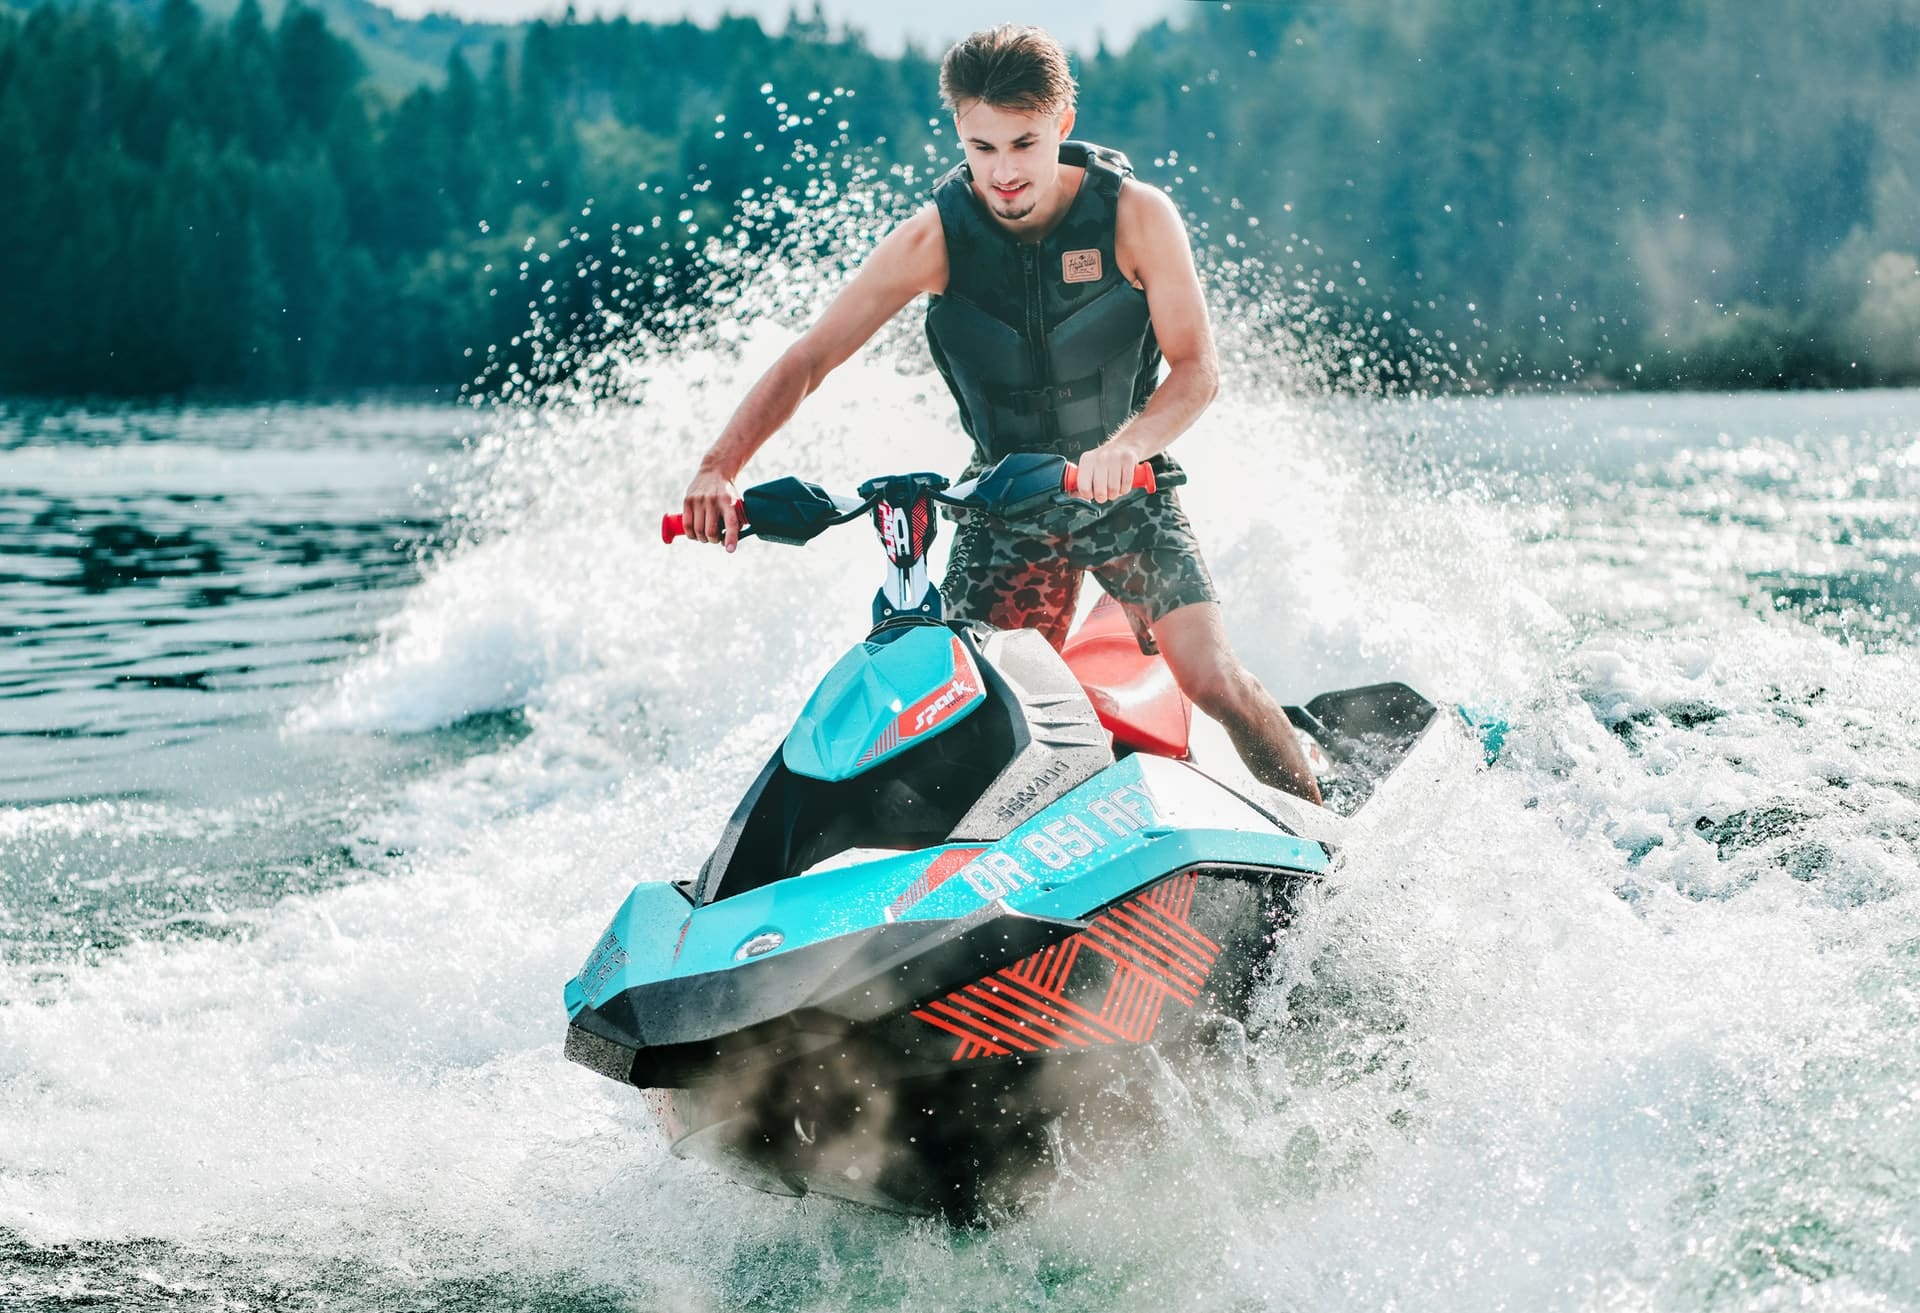 Buying a Personal Watercraft